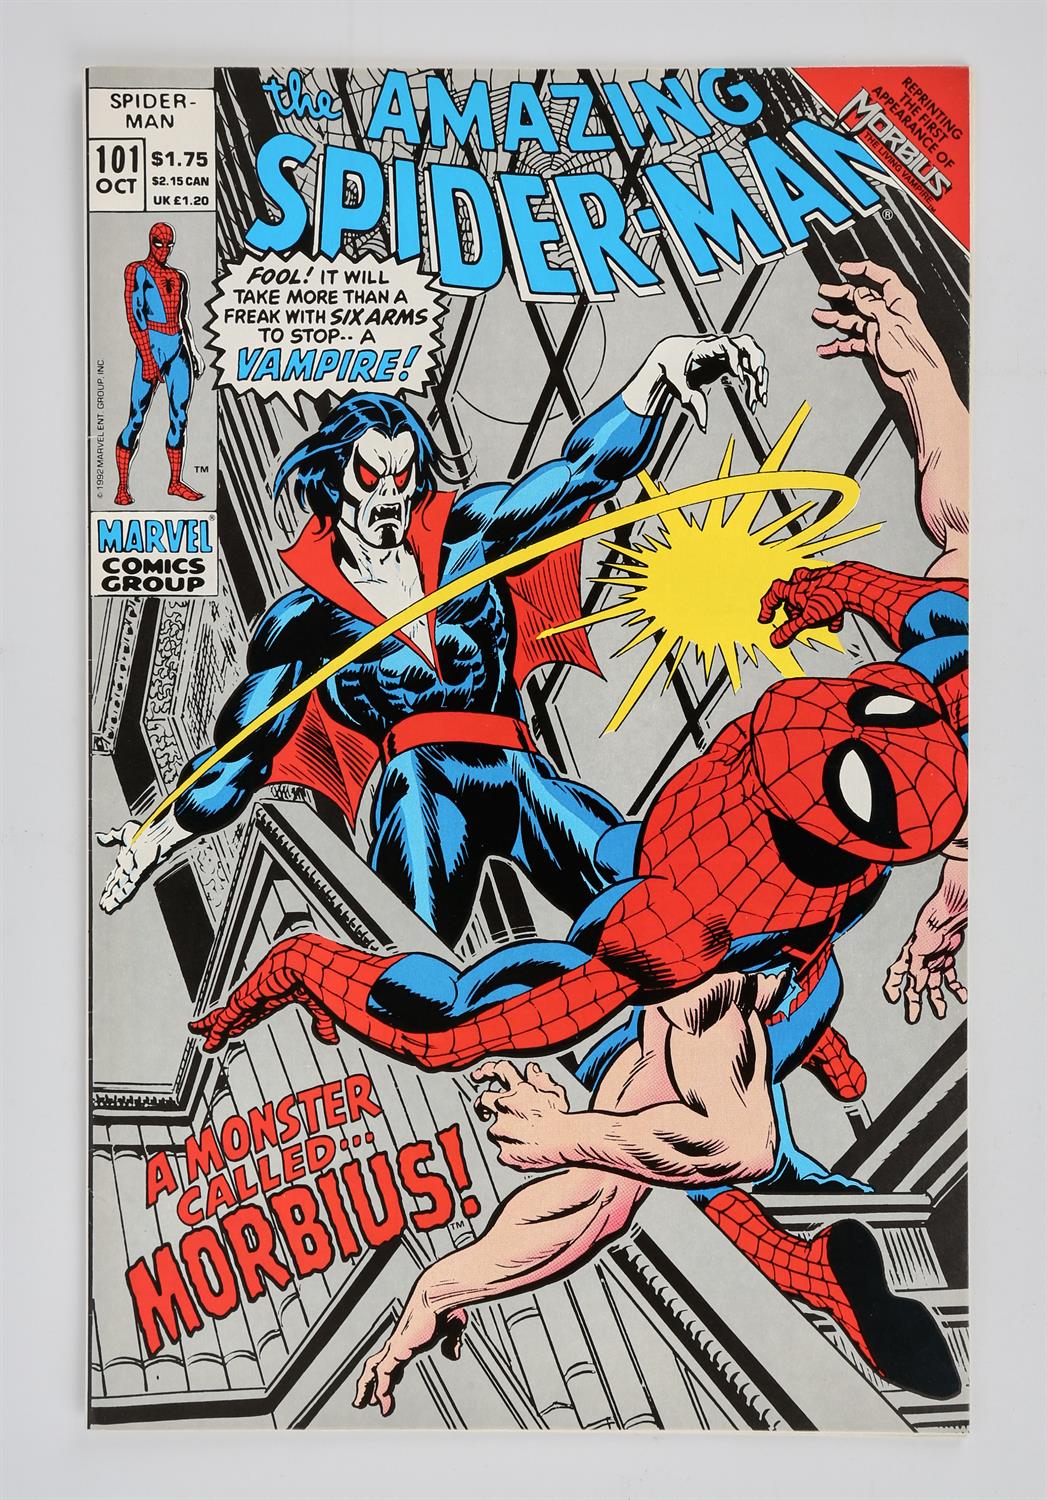 Marvel Comics: The Amazing Spider-Man No. 101 featuring the 1st appearance of Morbius (1992).